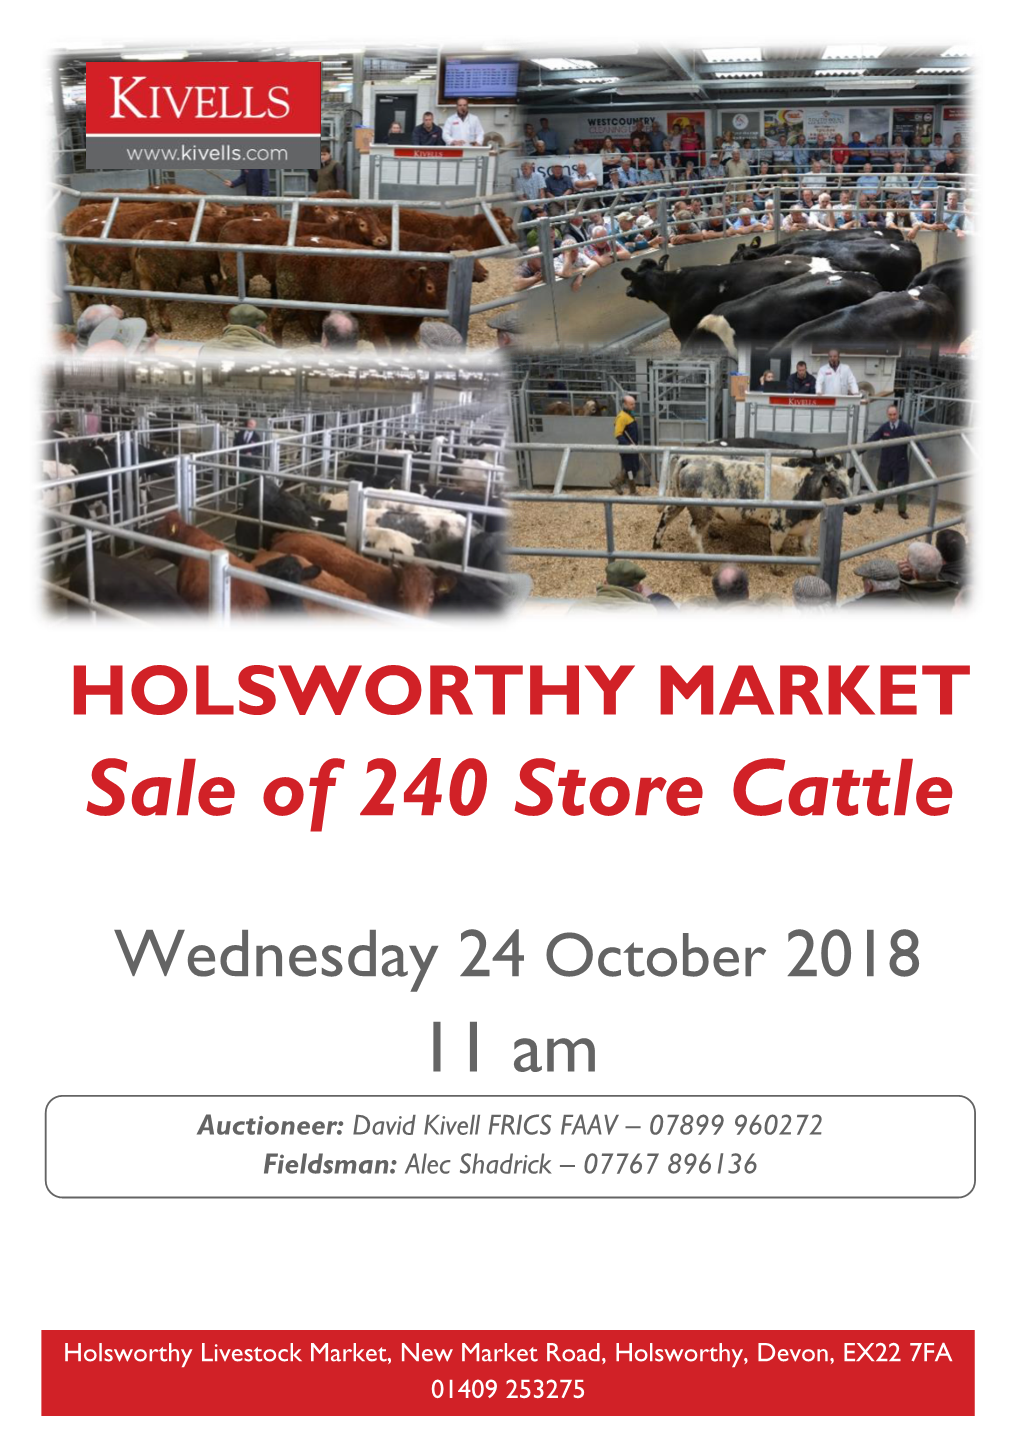 Sale of 240 Store Cattle